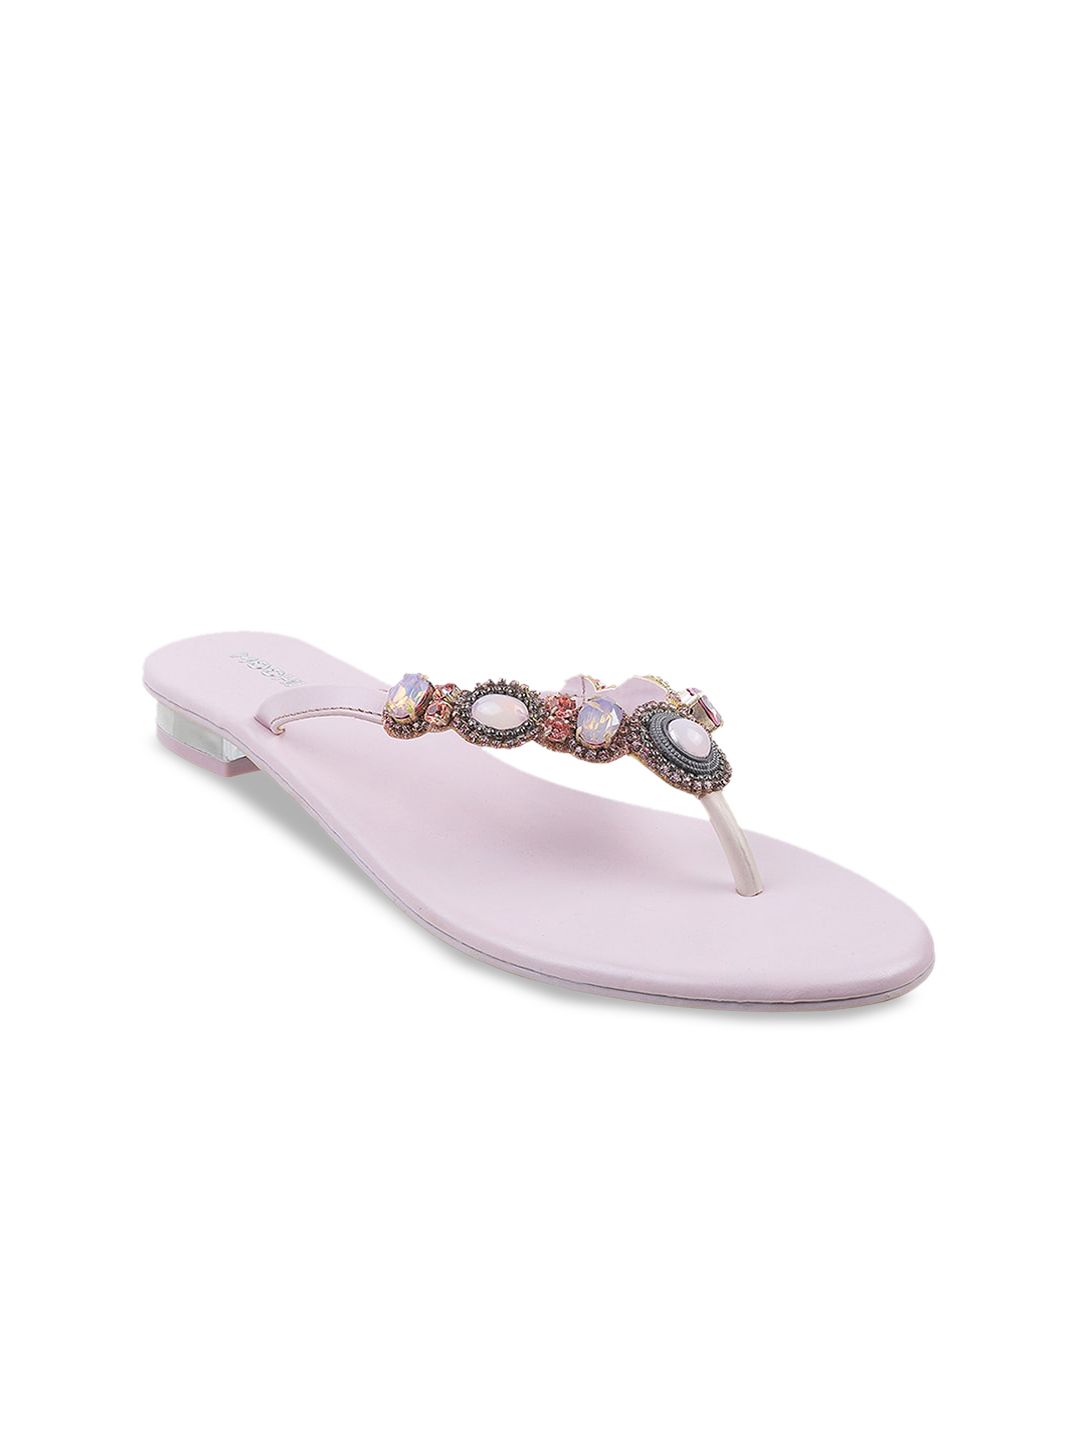 Mochi Women Embellished Open Toe T-Strap Flats Price in India